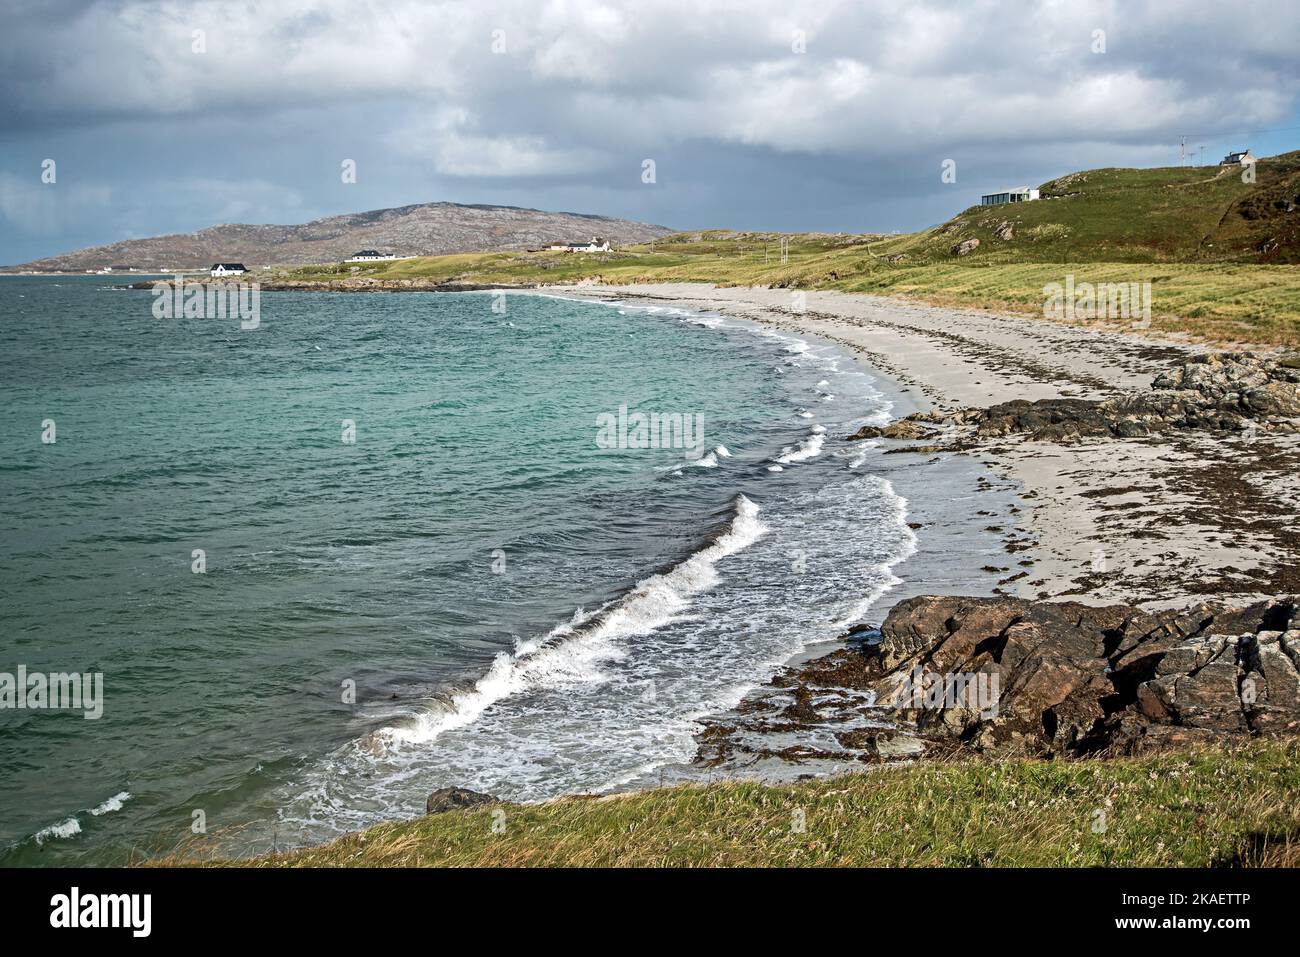 Prince's Bay, the beach were Bonnie Prince Charlie first arrived in Scotland, on the Isle of Eriskay, Outer Hebrides, Scotland. Stock Photo